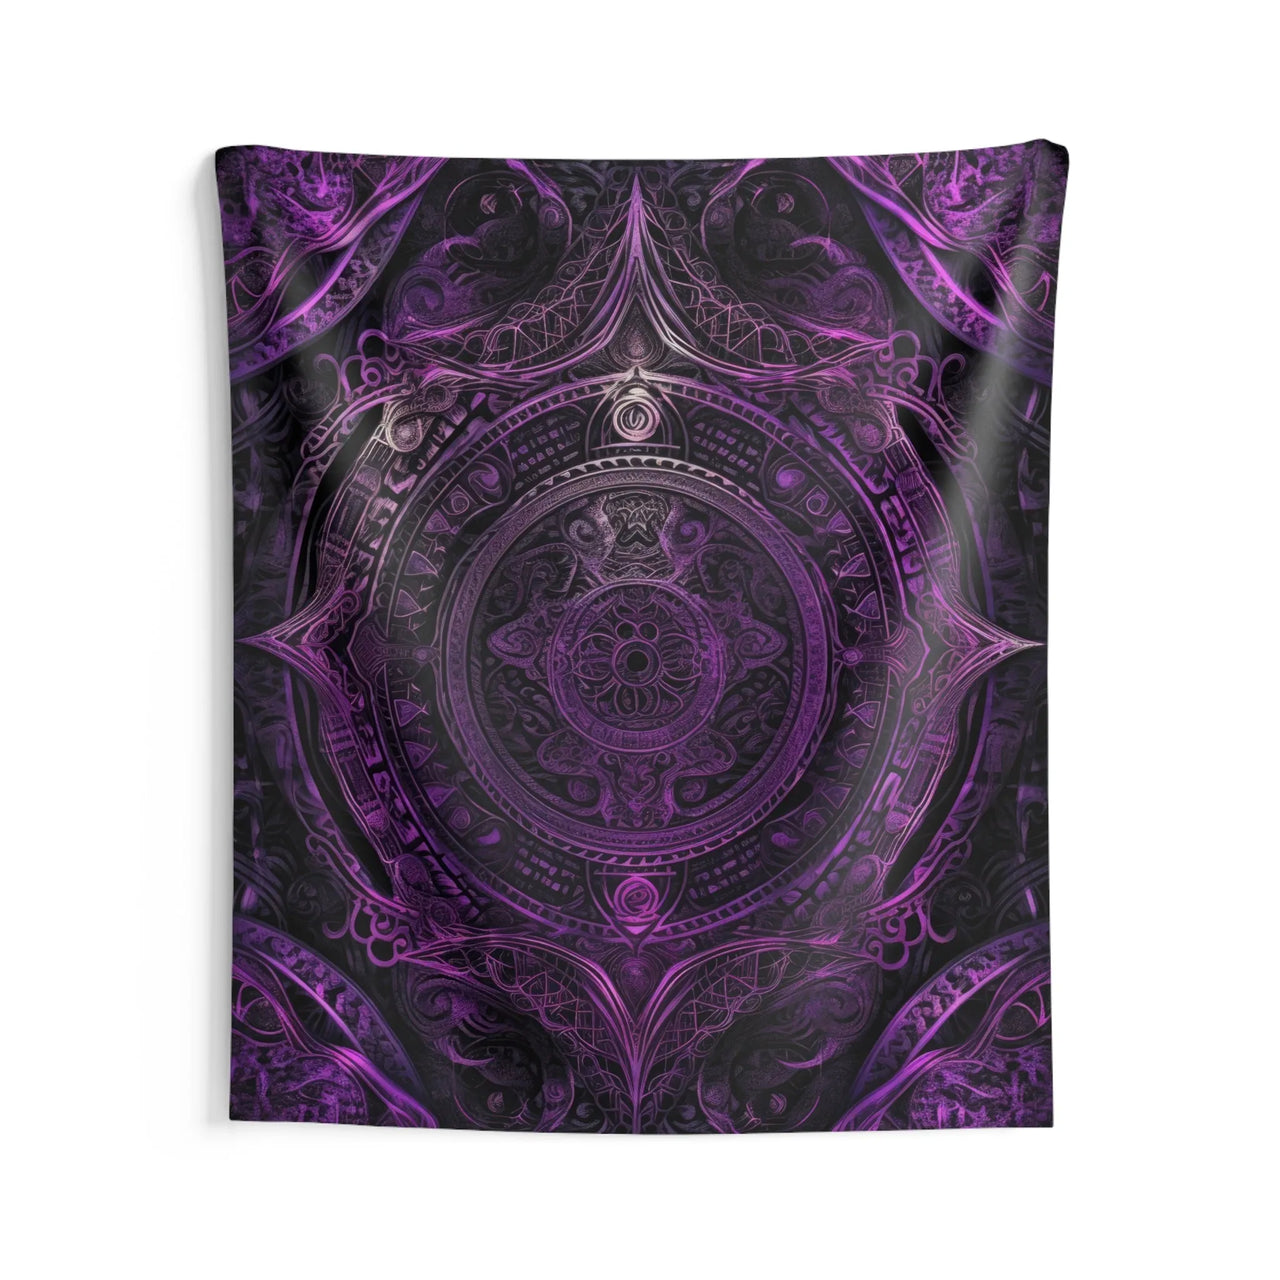 Camping Festival Mystic Symphony Tapestry in the Celestial Art Style with Symmetrical Deep Purple Design - GroovyGallery